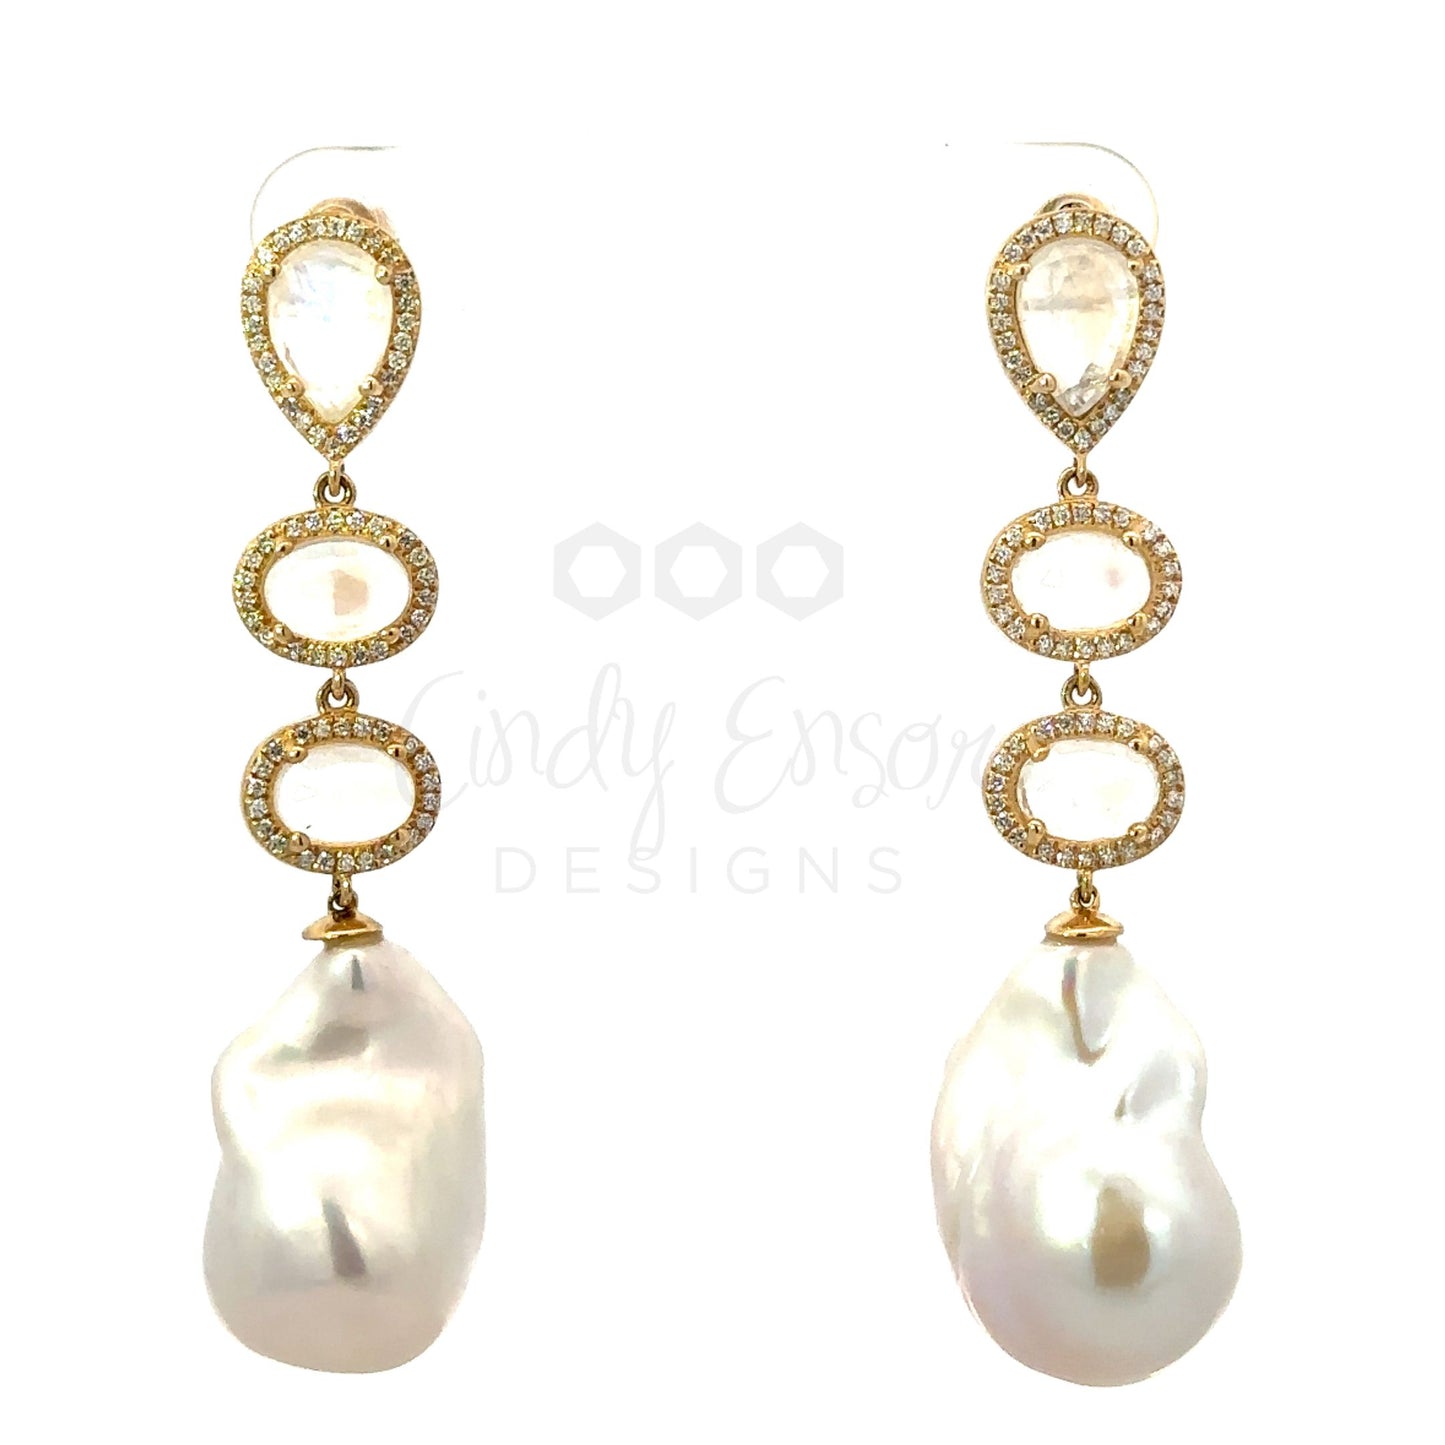 Triple Moonstone Baroque Pearl Drop Earrings with Pave Accents